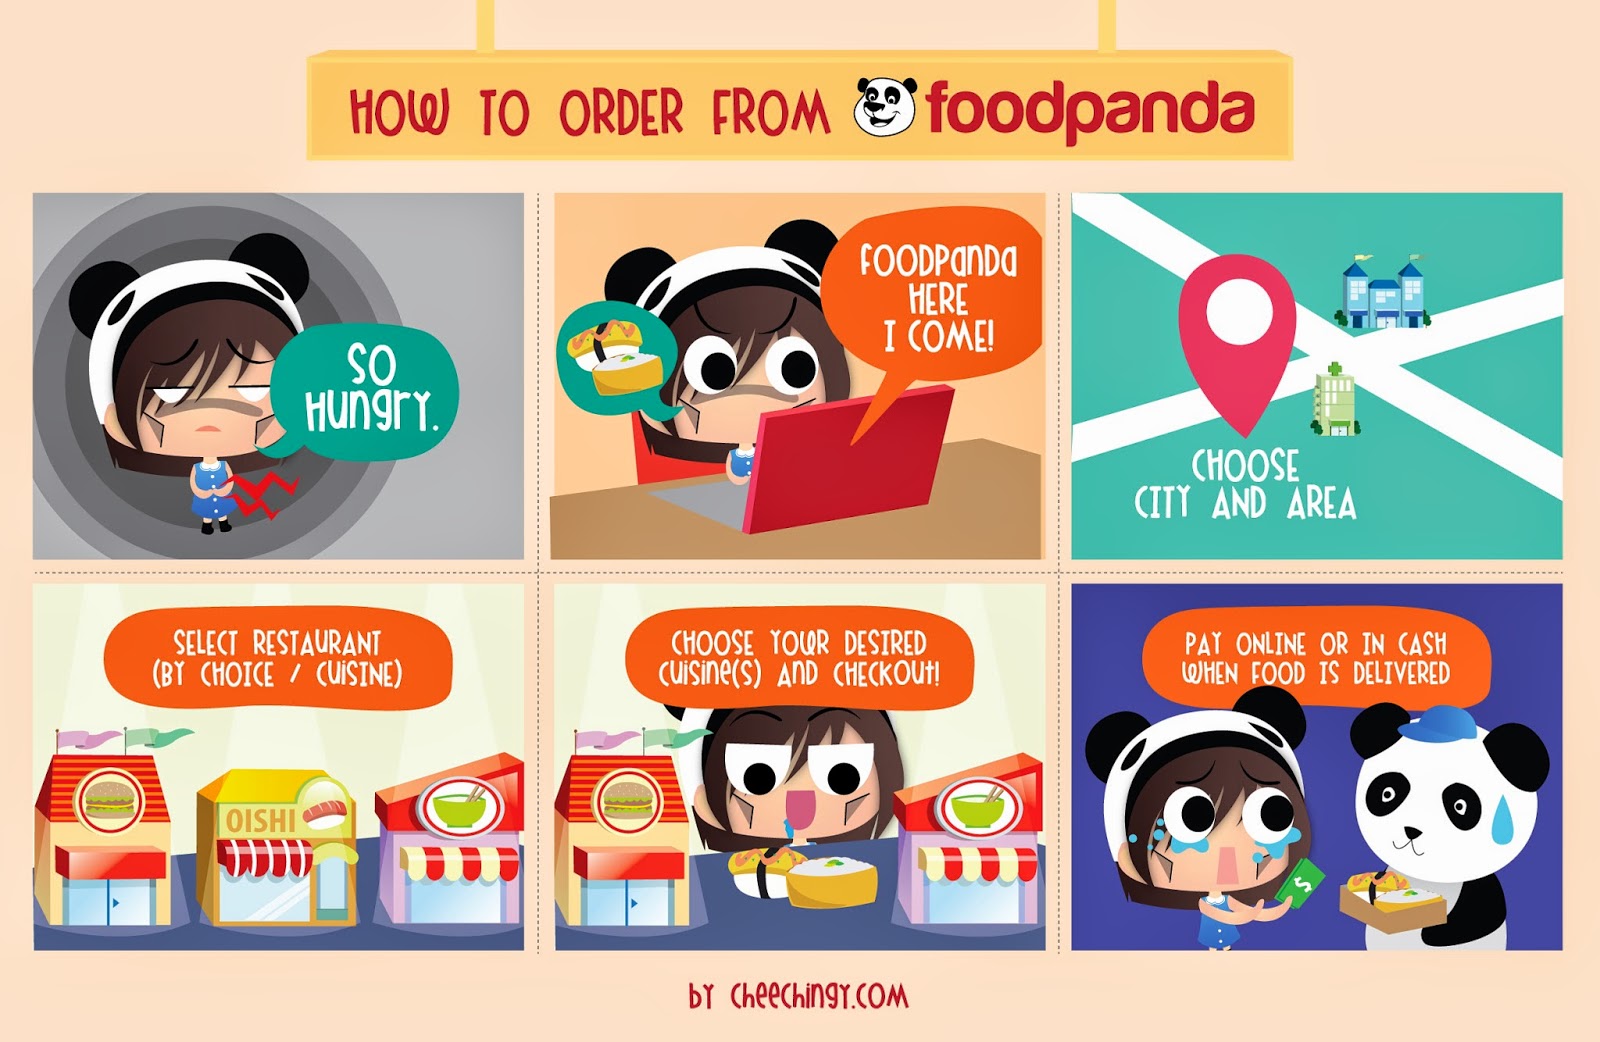 Foodpanda, foodpanda.com , foodpanda review, foodpanda.com review, foodpanda india, foodpanda website review, foodpanda malasiya, foodpanda india review, foodpanda malasiya review, food, food website, how to order food online, how to order online , how to order on foodpanda, how to use foodpanda, how to order food online in India, how to order food on foodpanda in india, Indian food online, Chinese food online, Indian food, Chinese , Chinese food online, love food, food directly , food yellow pages